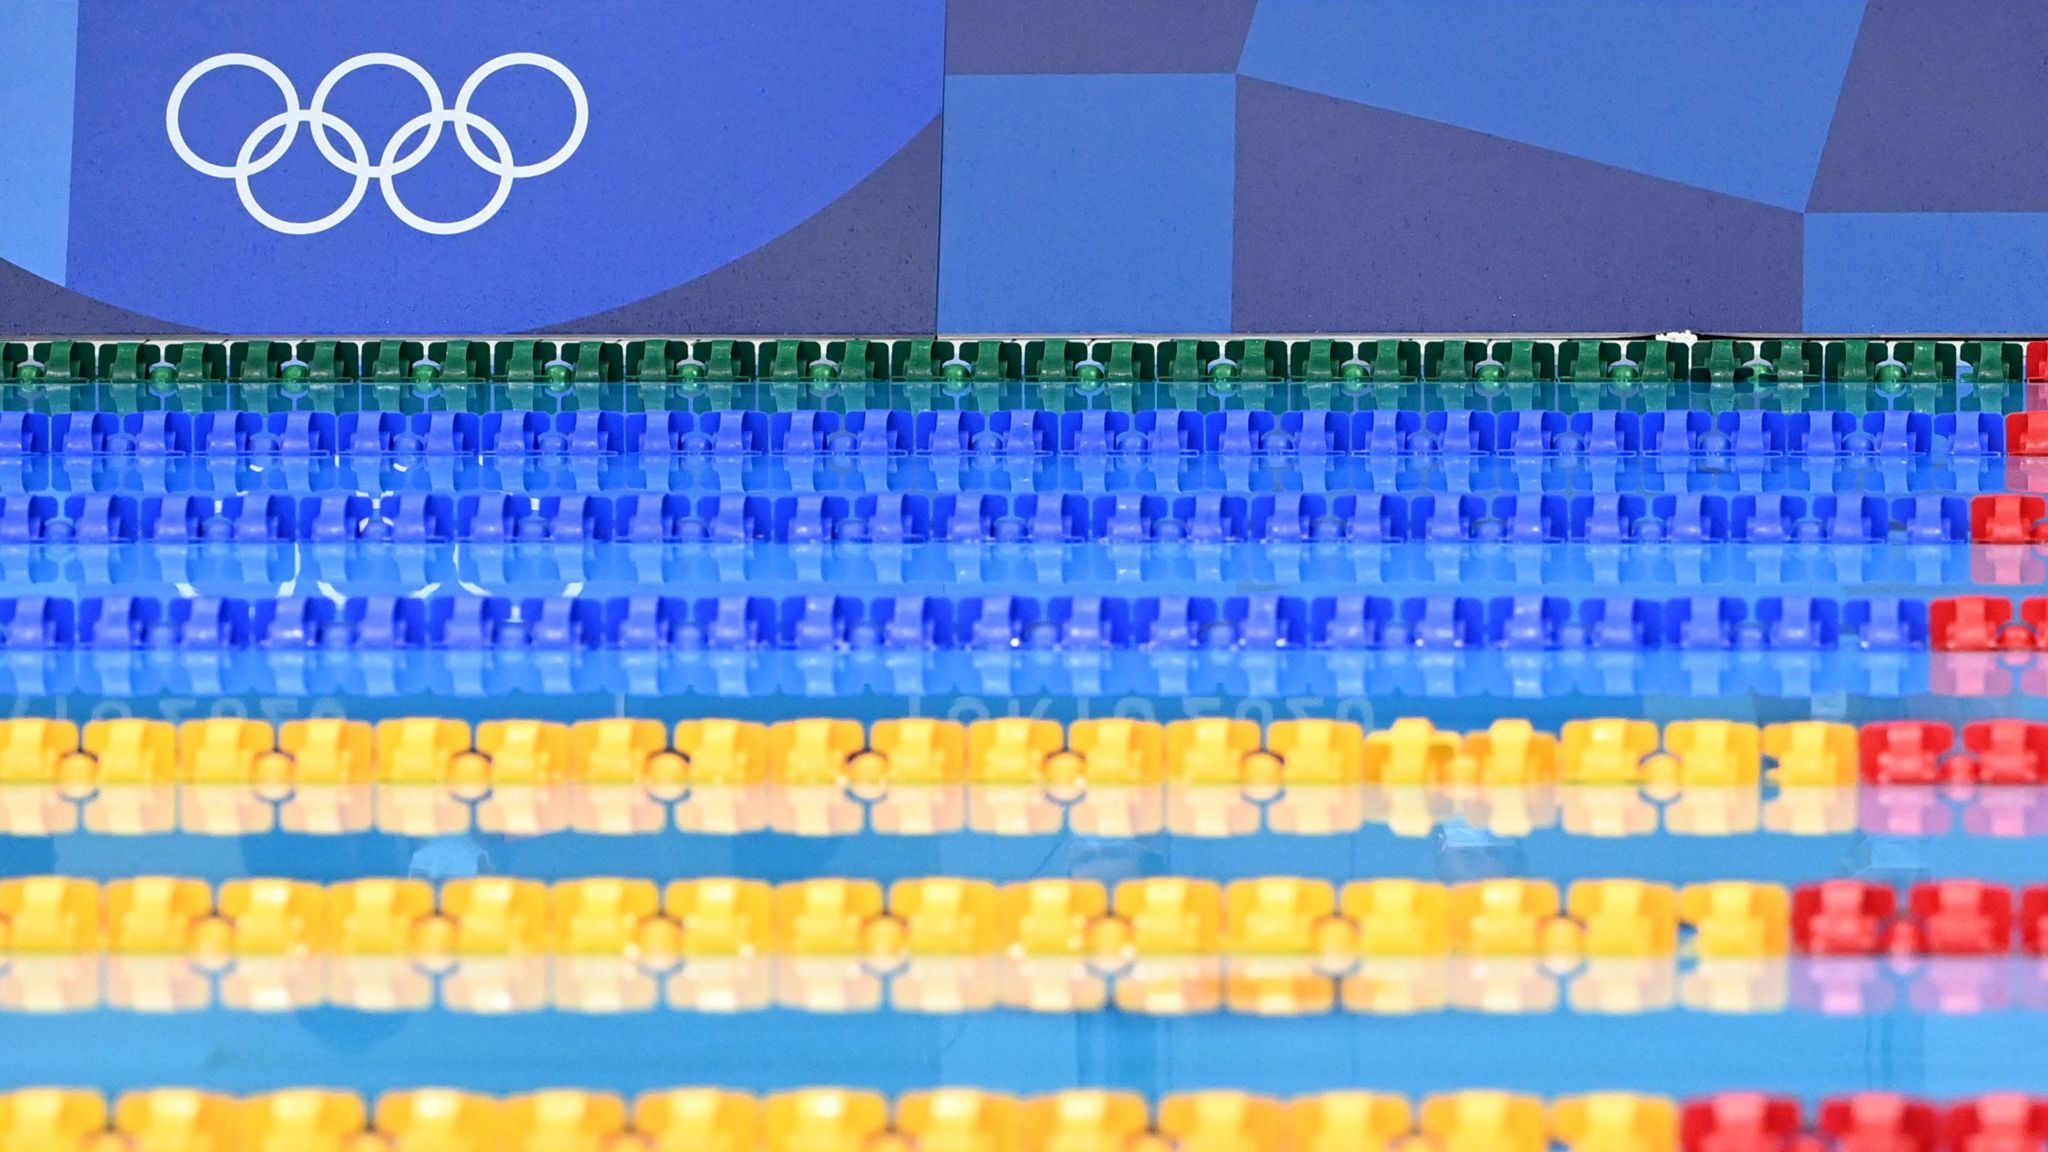 The swimming pool at the Tokyo 2020 Olympic Games